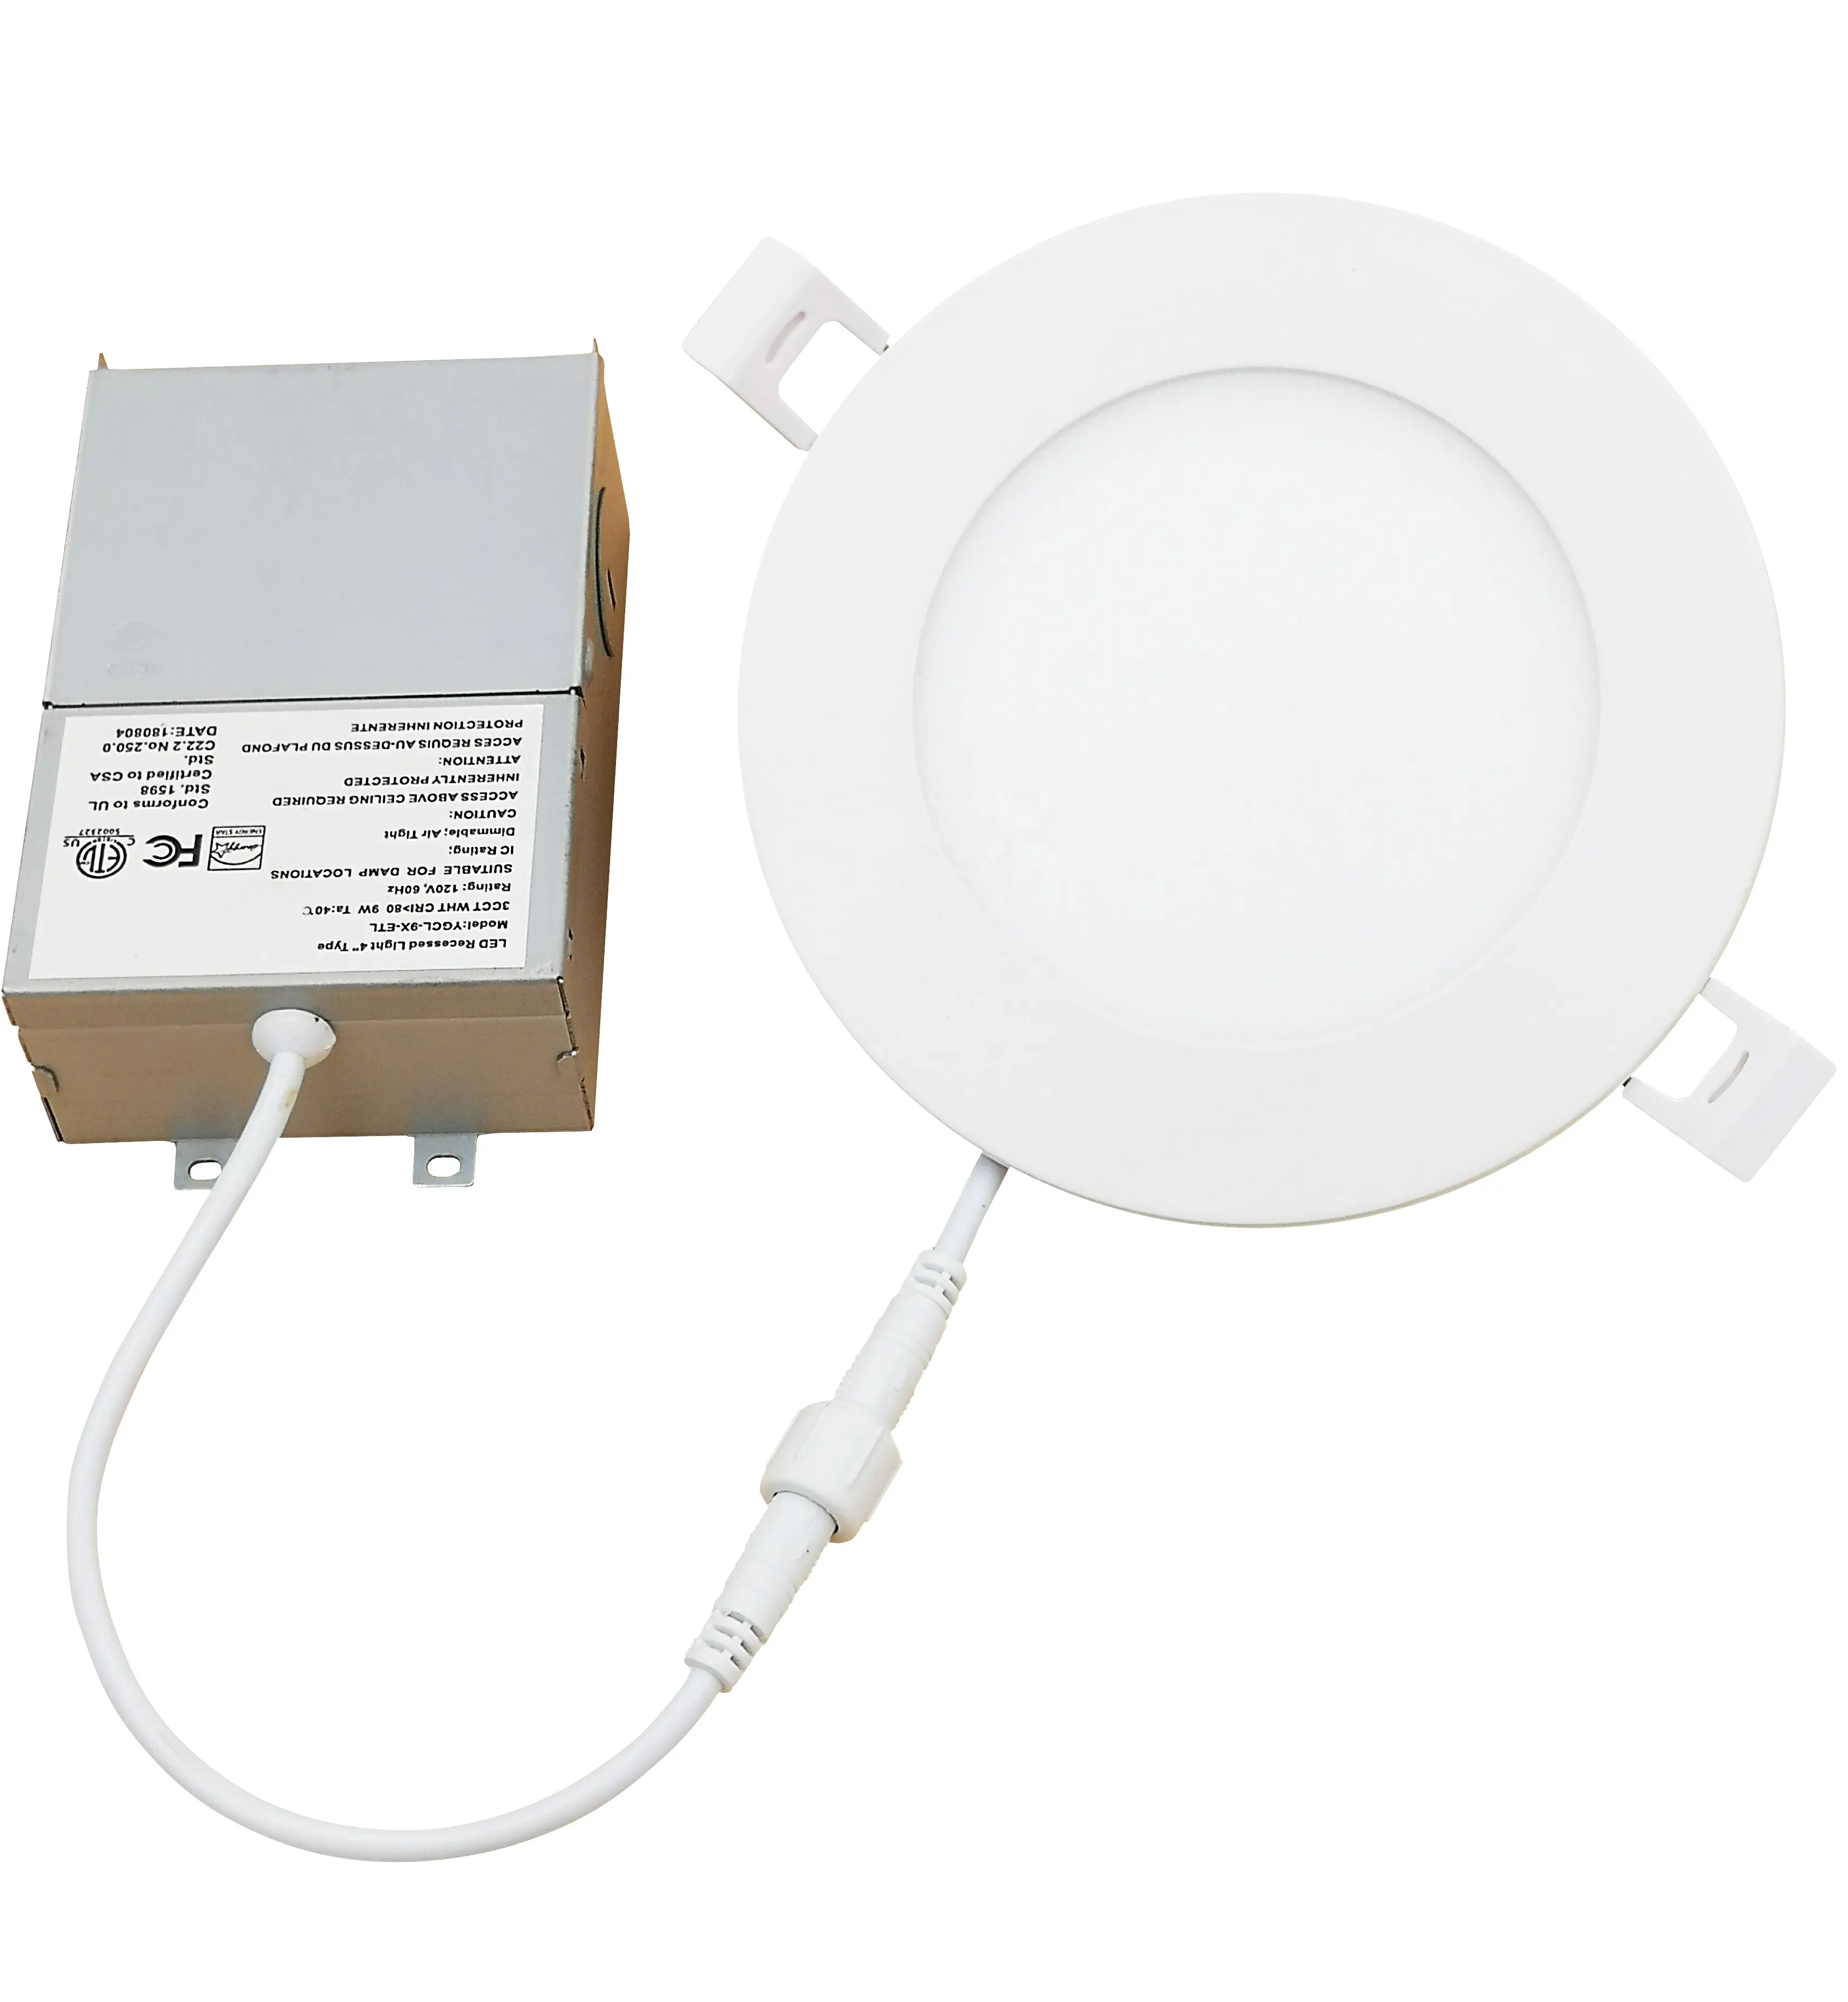 3CCT (3K-4K-5K) All-in-One Design 700LM Energy Star Listed 4" Recessed Panel LED Potlight